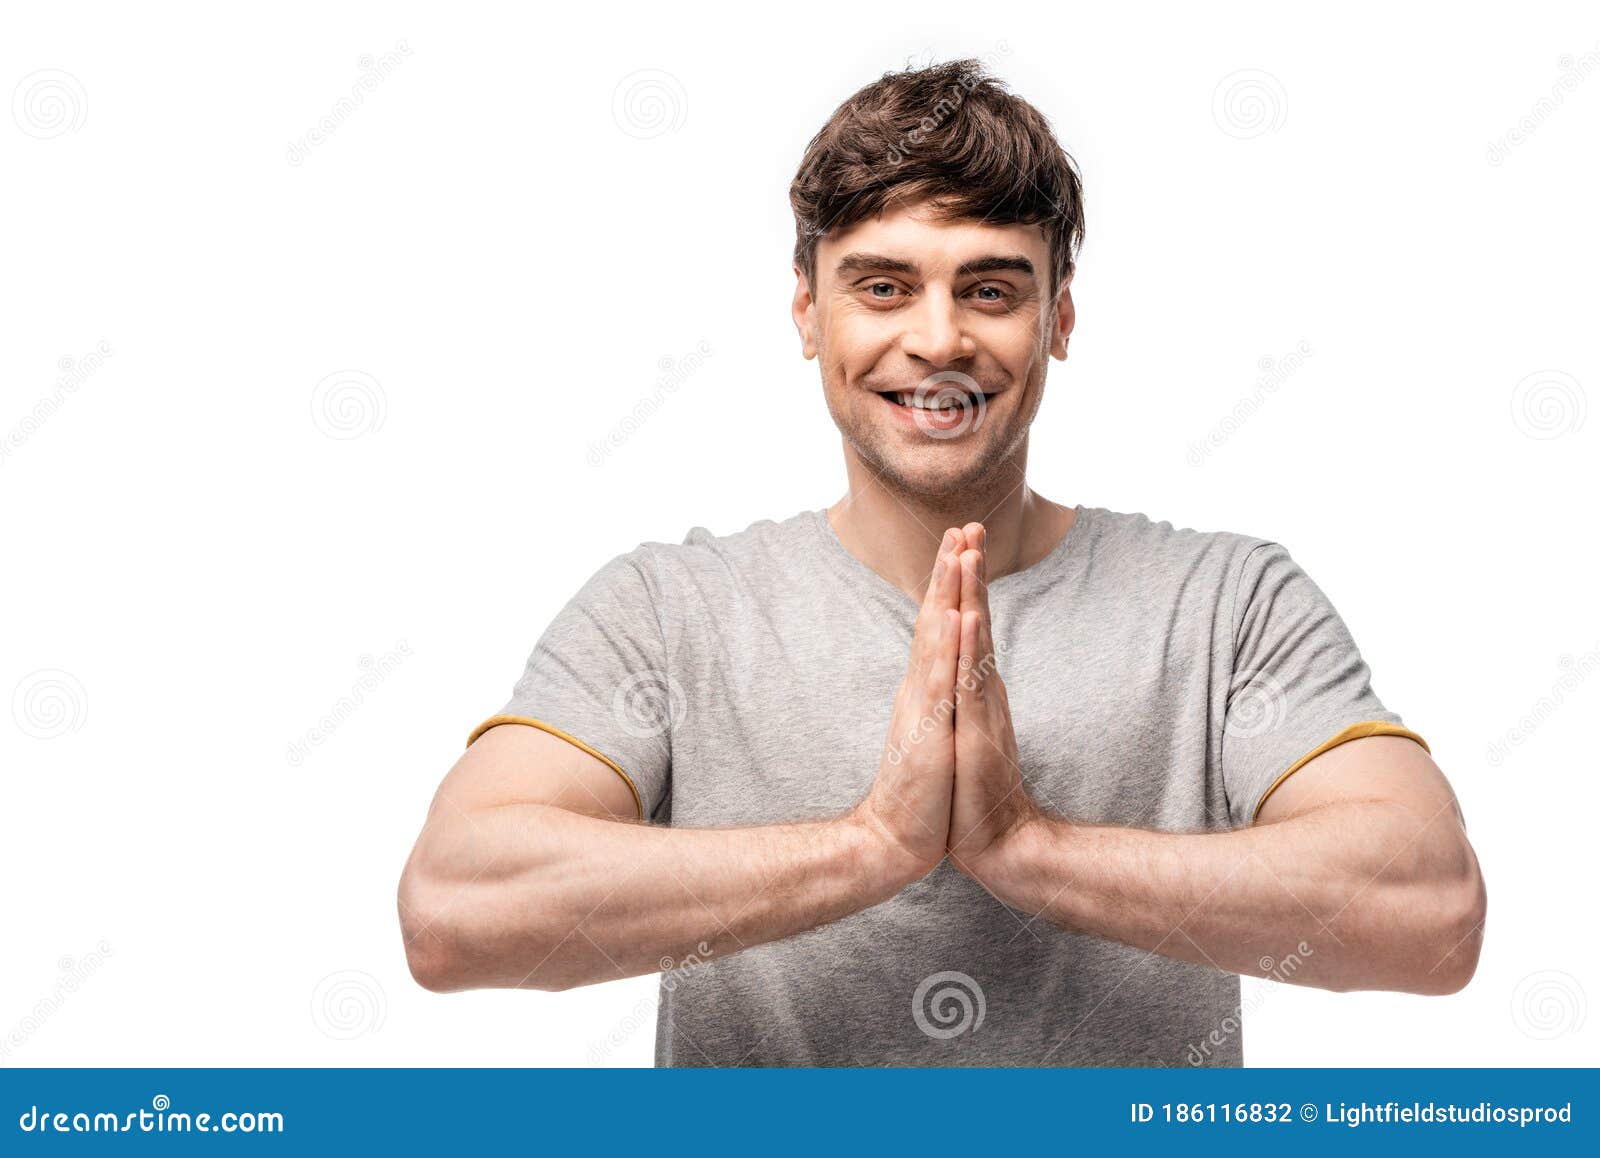 Handsome Man Showing Please Gesture while Looking at Camera Isolated on ...